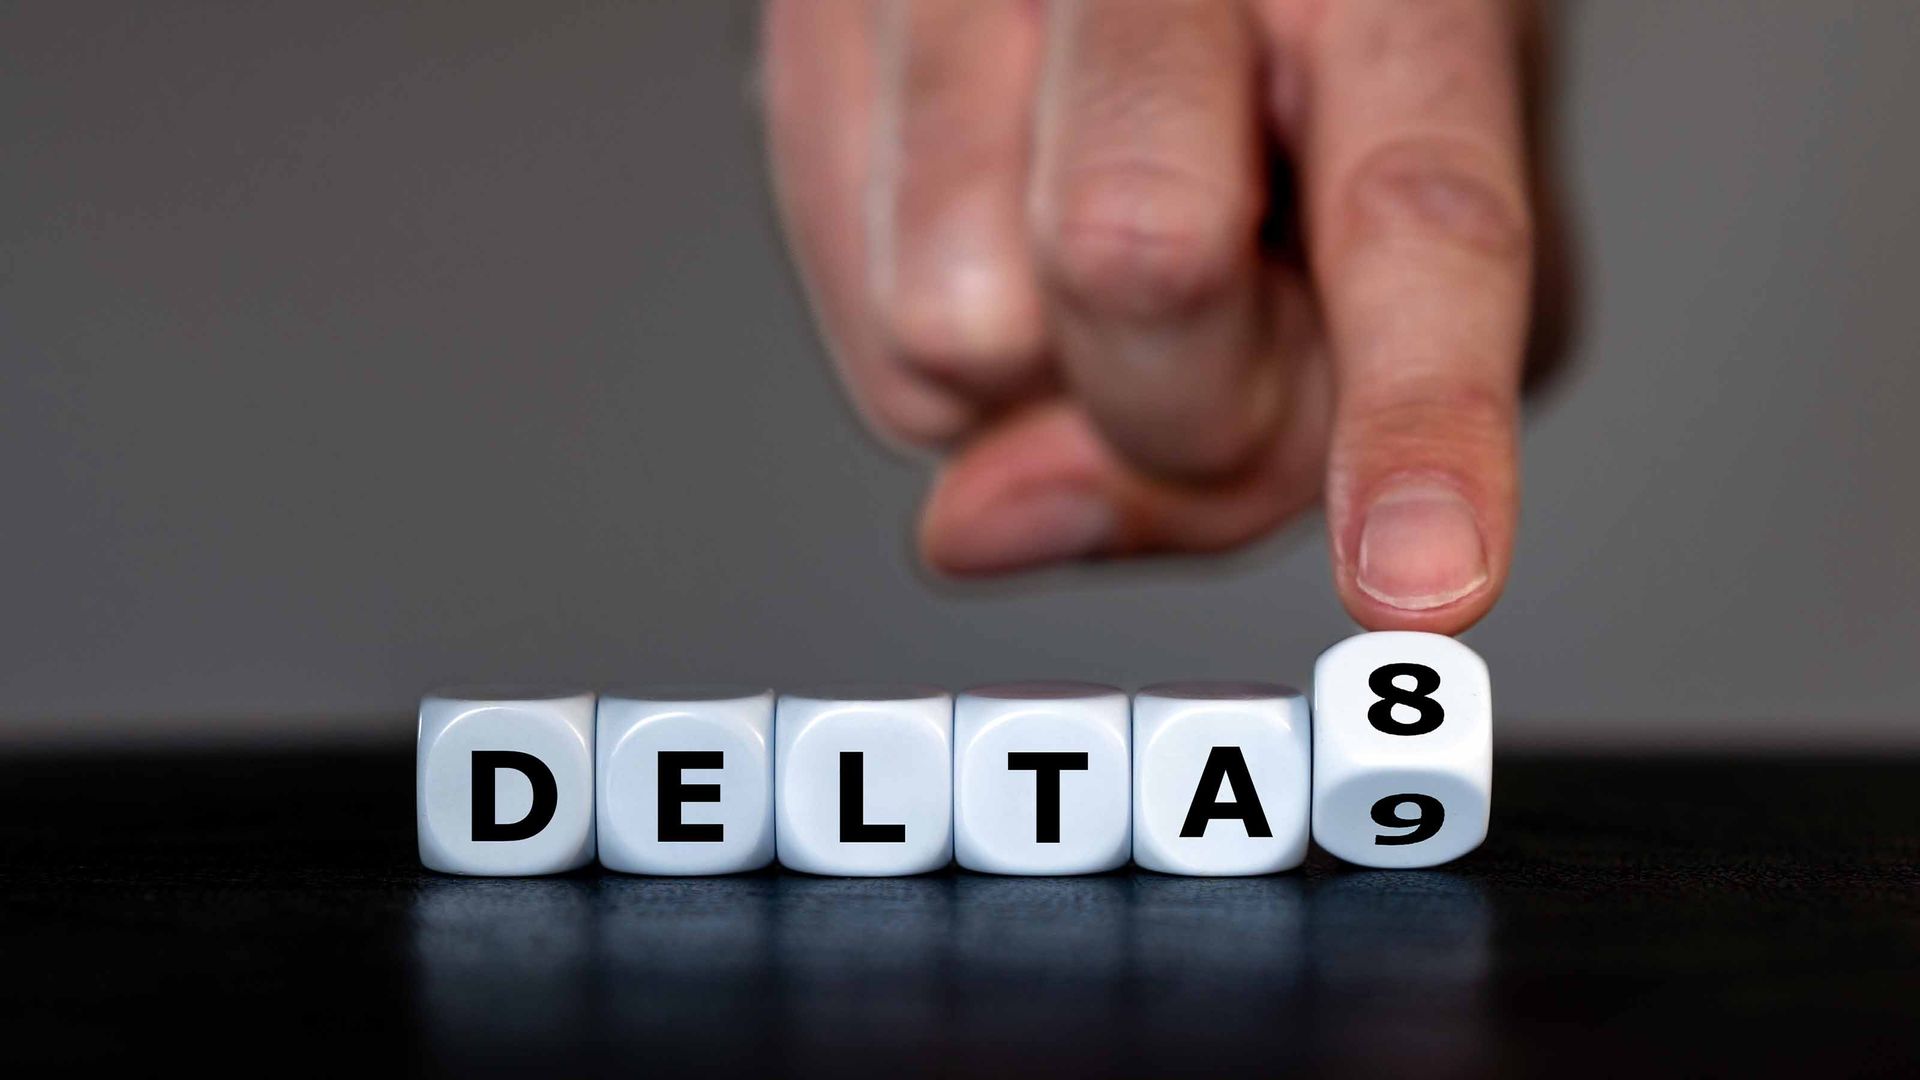 Hand turns dice and changes the expression 'delta 9' to 'delta 8'. Symbol for the Delta-8-tetrahydrocannabinol, a psychoactive cannabinoid found in the Cannabis plant.